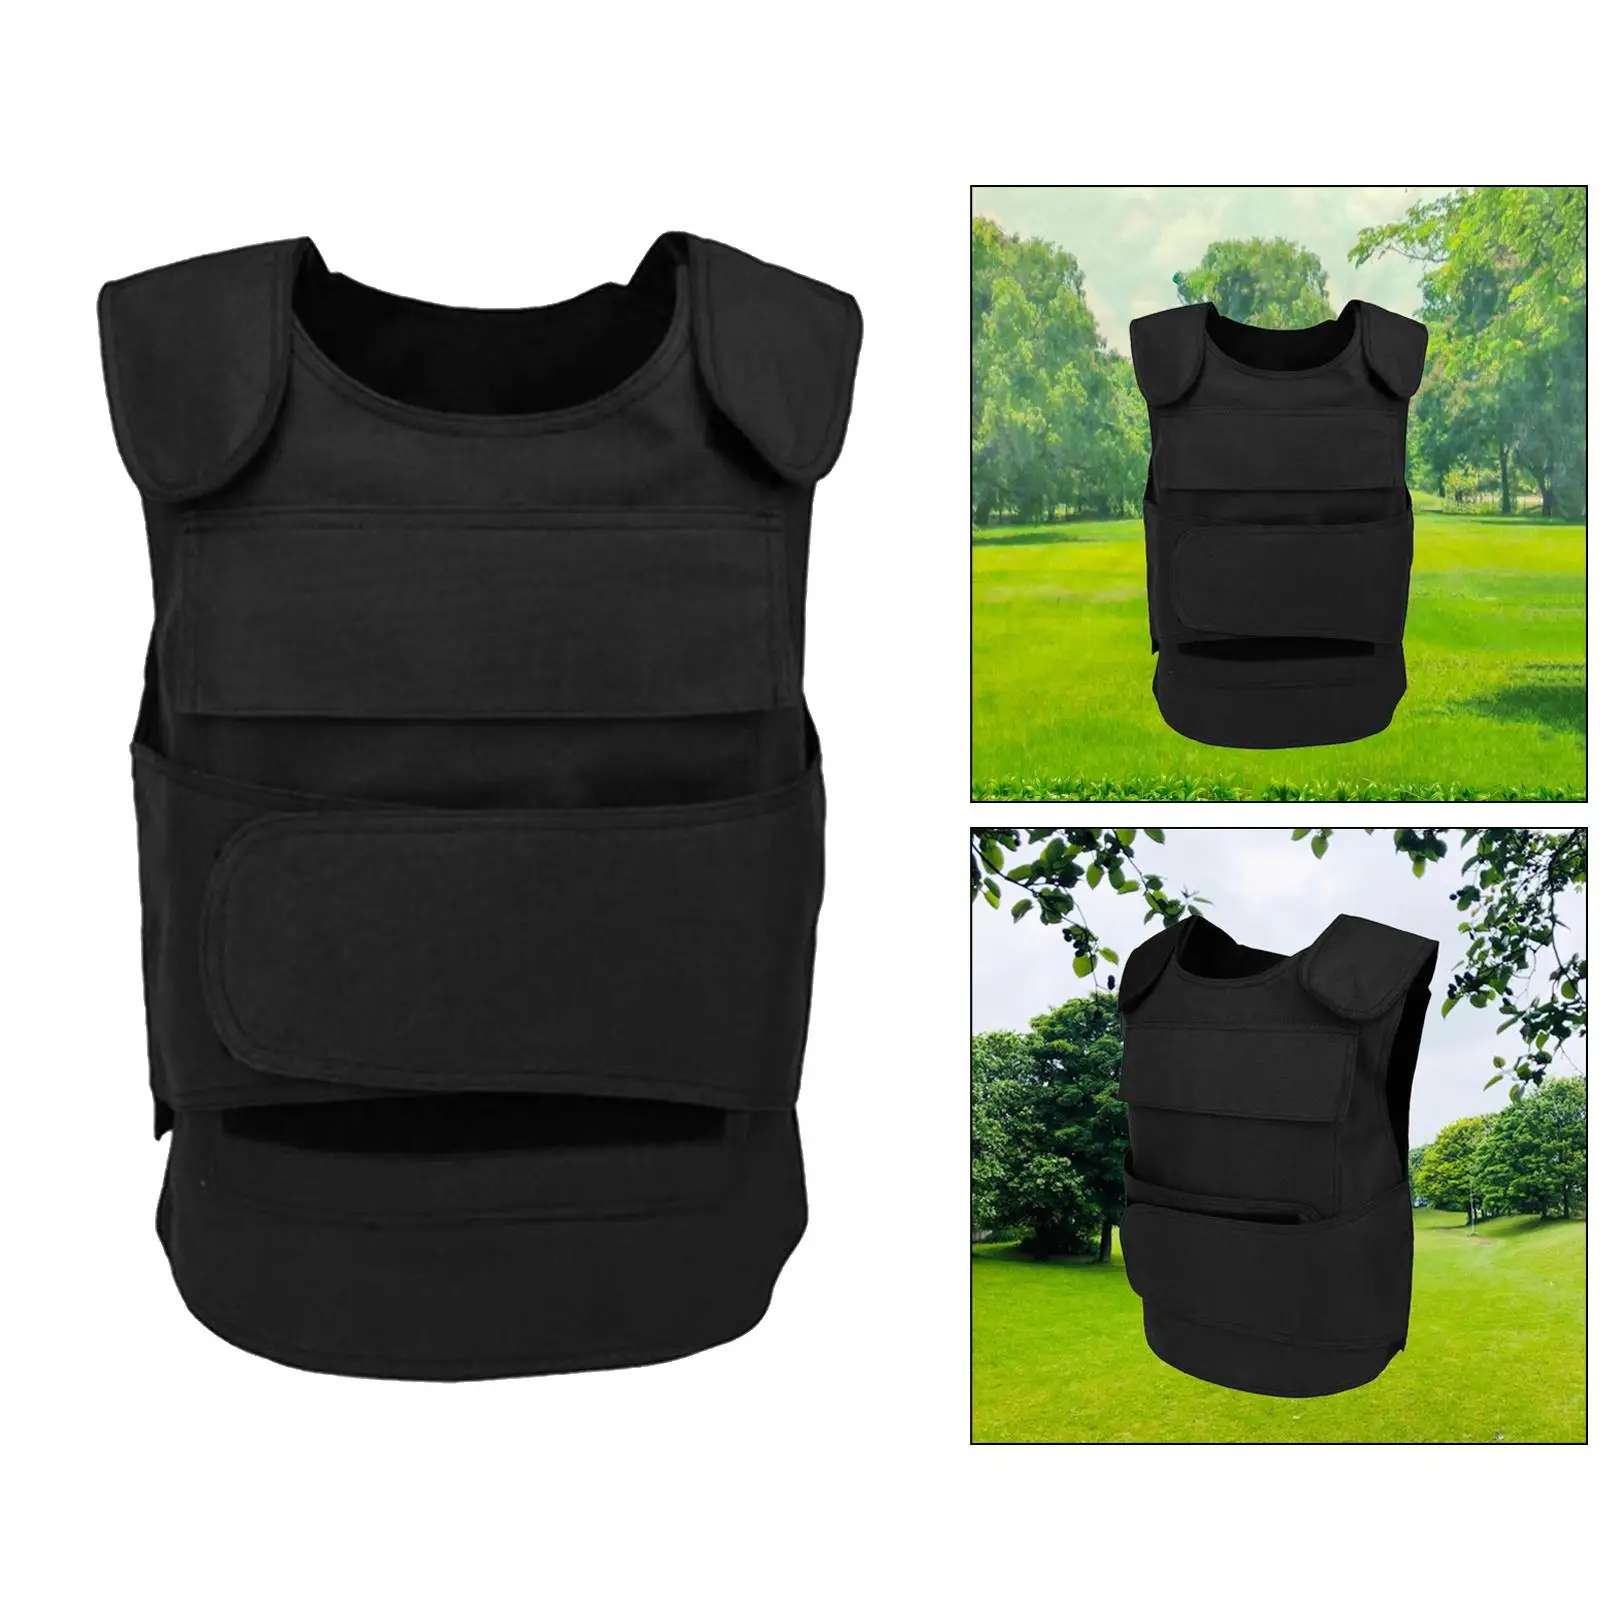 Utility Tactical Vest -Light  Game Training Vests for Adults